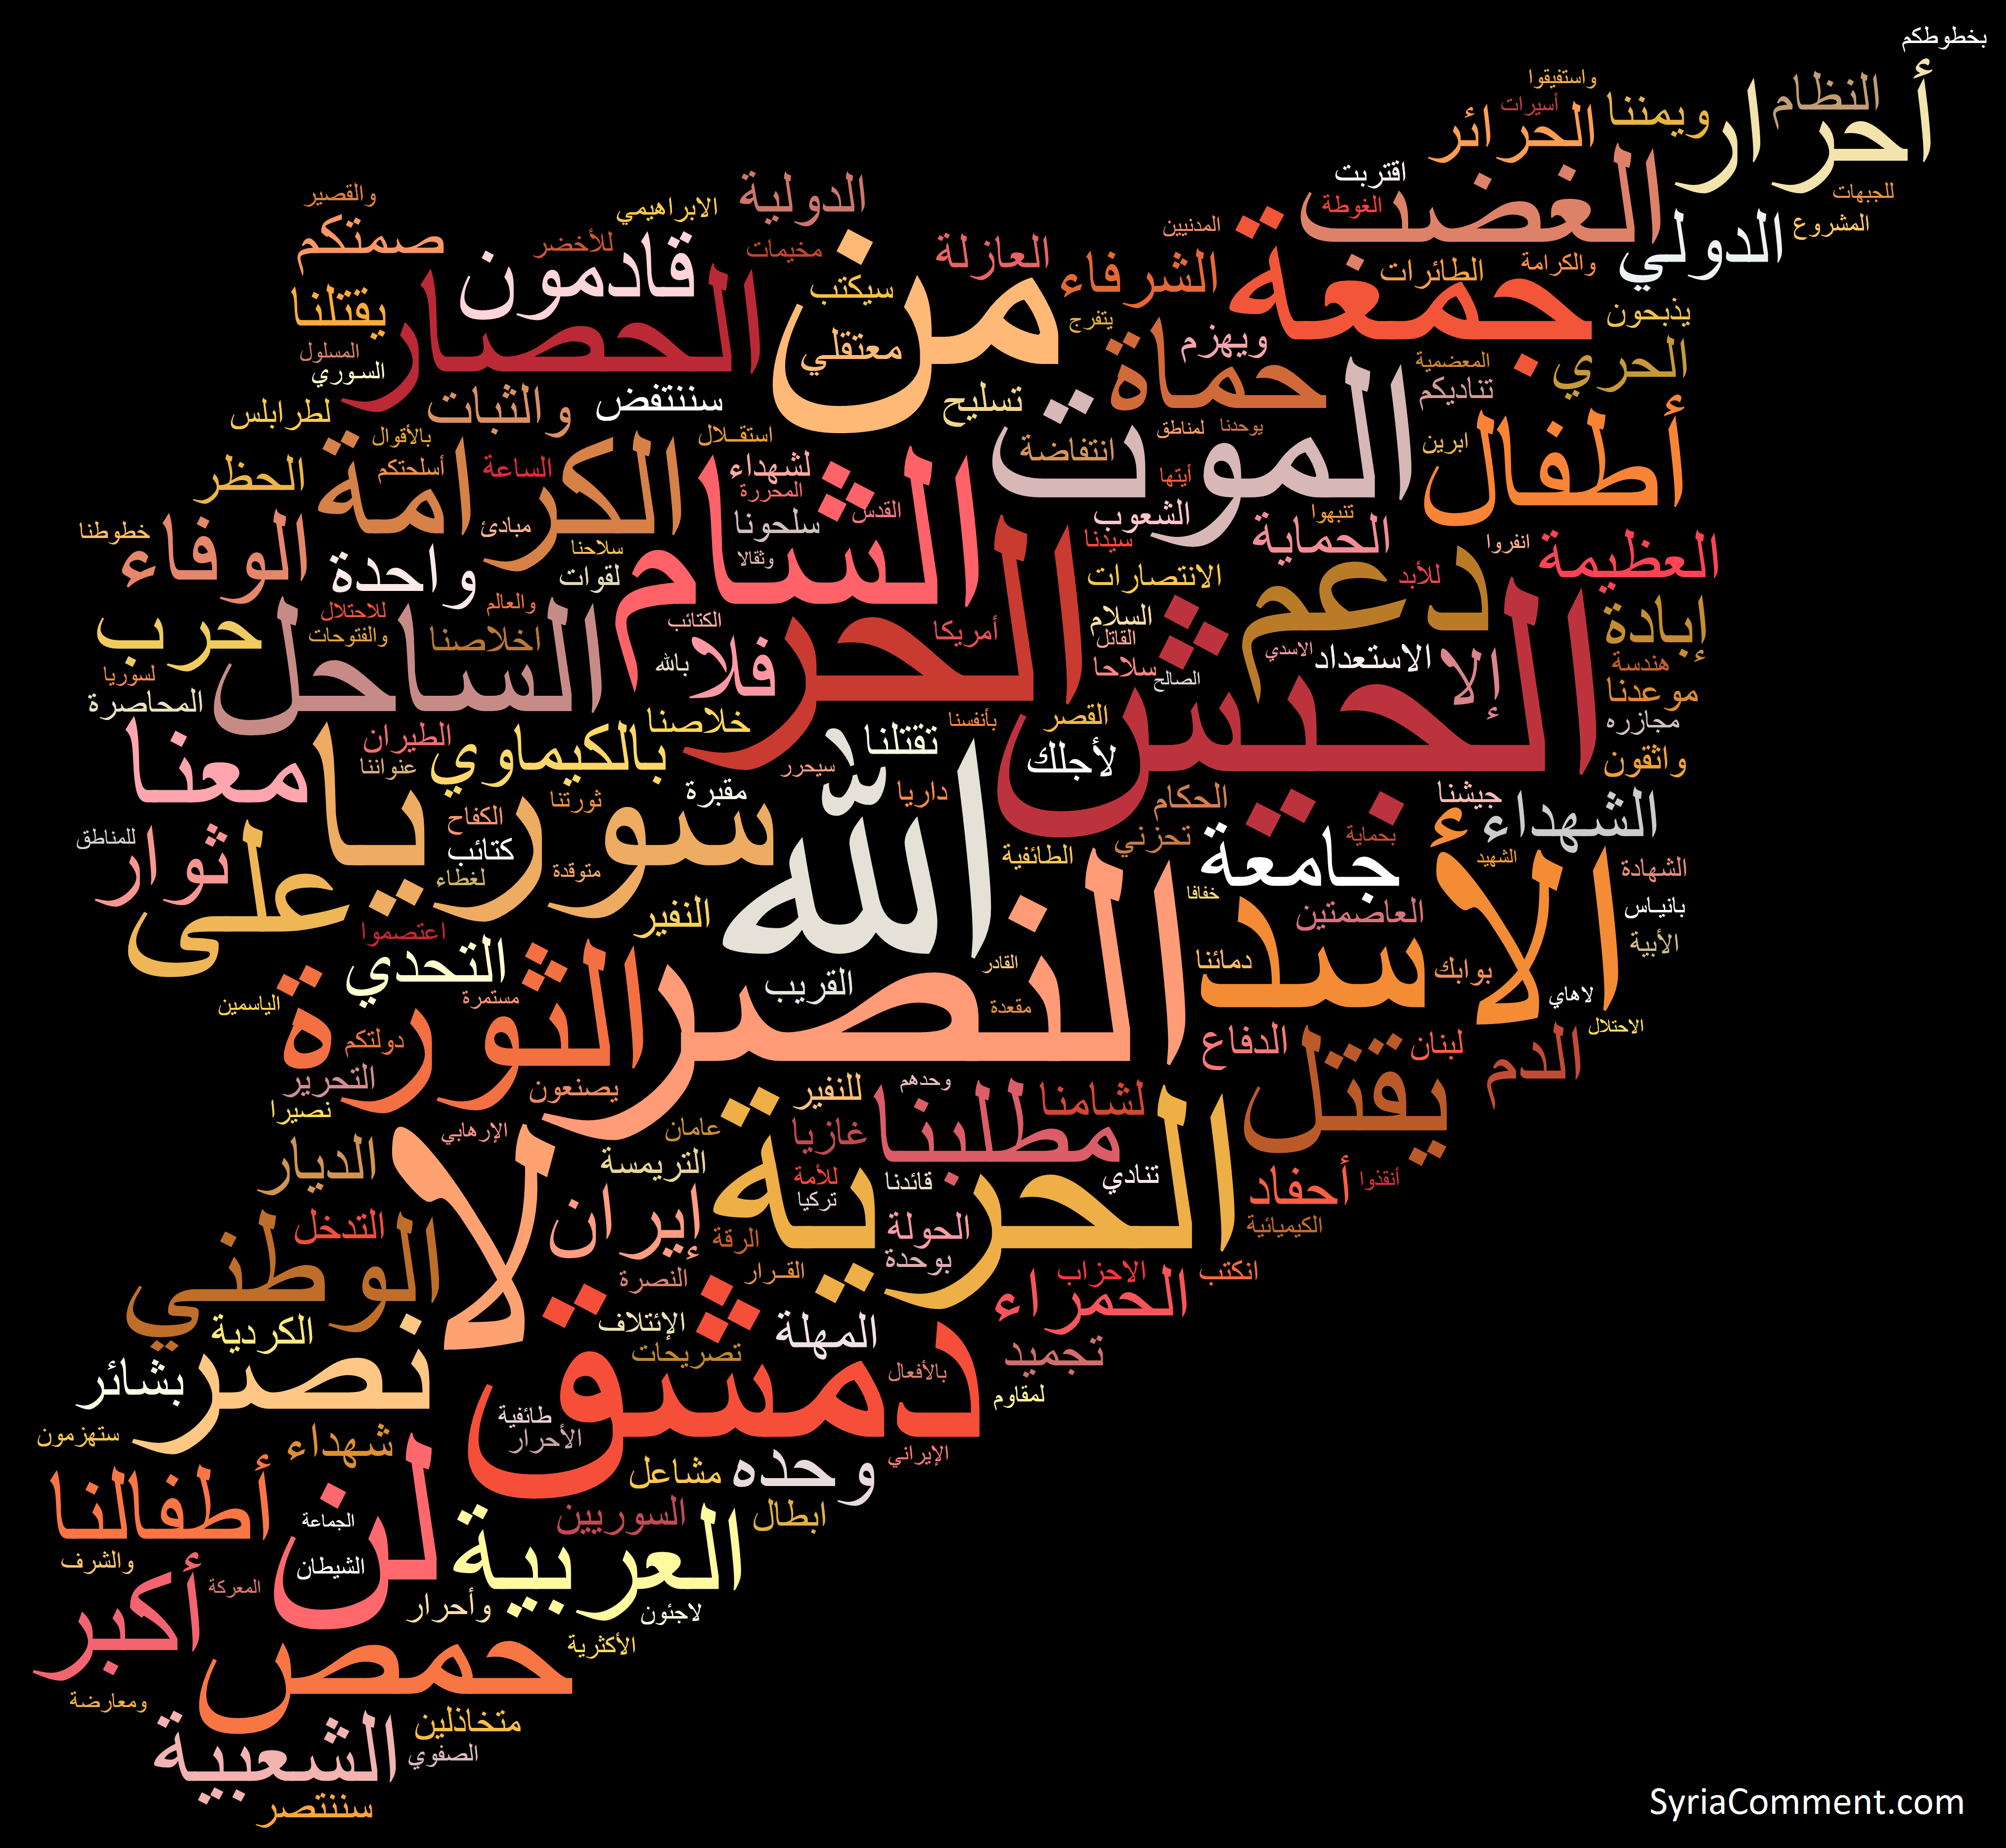 The Names of the Syrian Revolution - Arabic